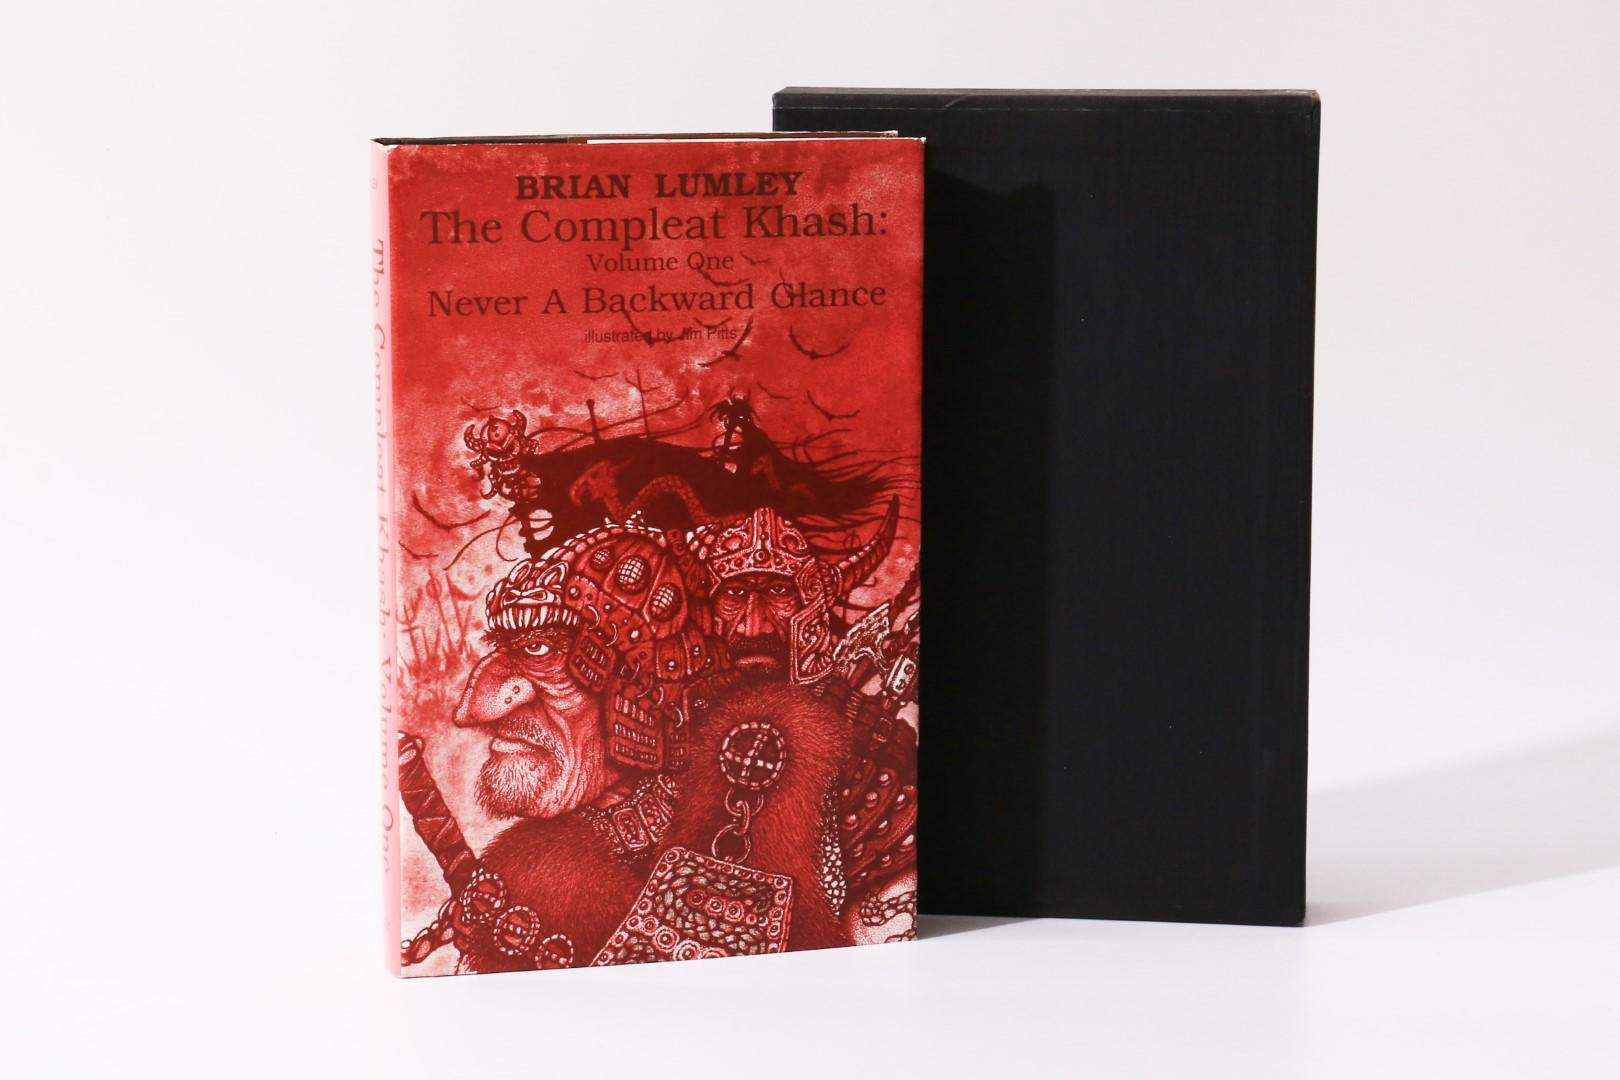 Brian Lumley - The Compleat Khash: Volume One, Never a Backward Glance - W. Paul Ganley, 1991, Signed Limited Edition.